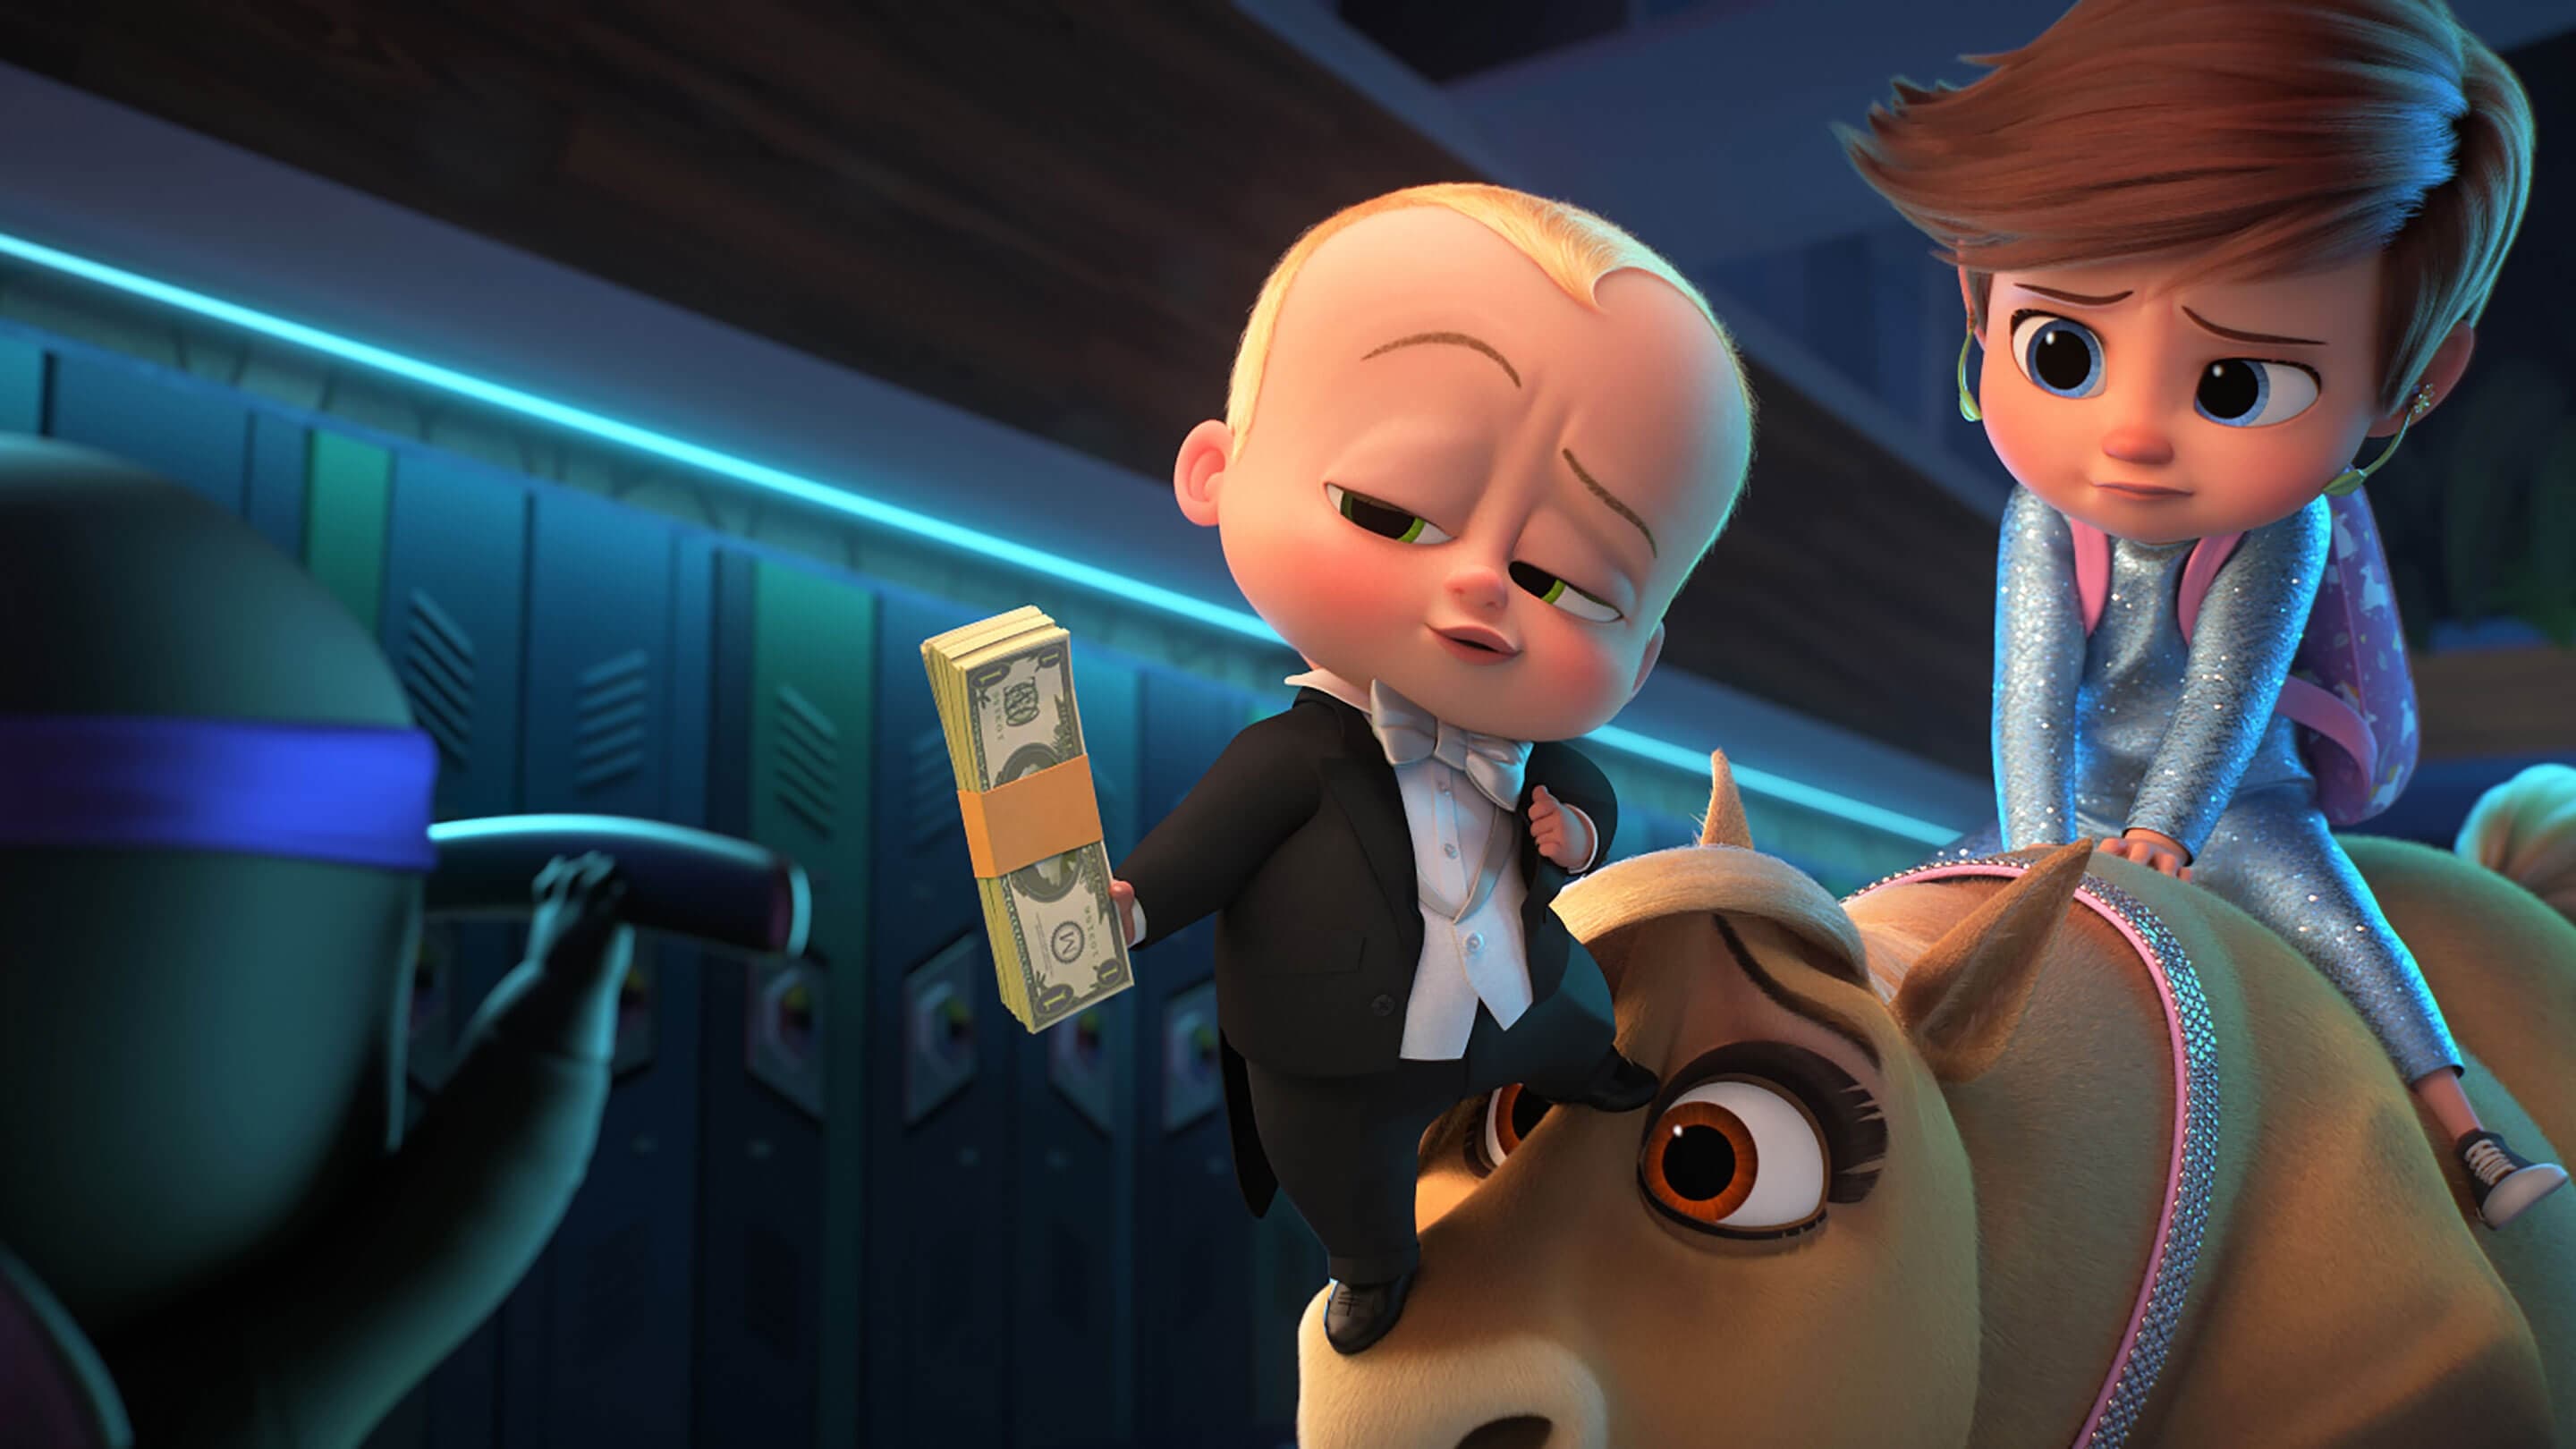  The Boss Baby: Family Business movie cast